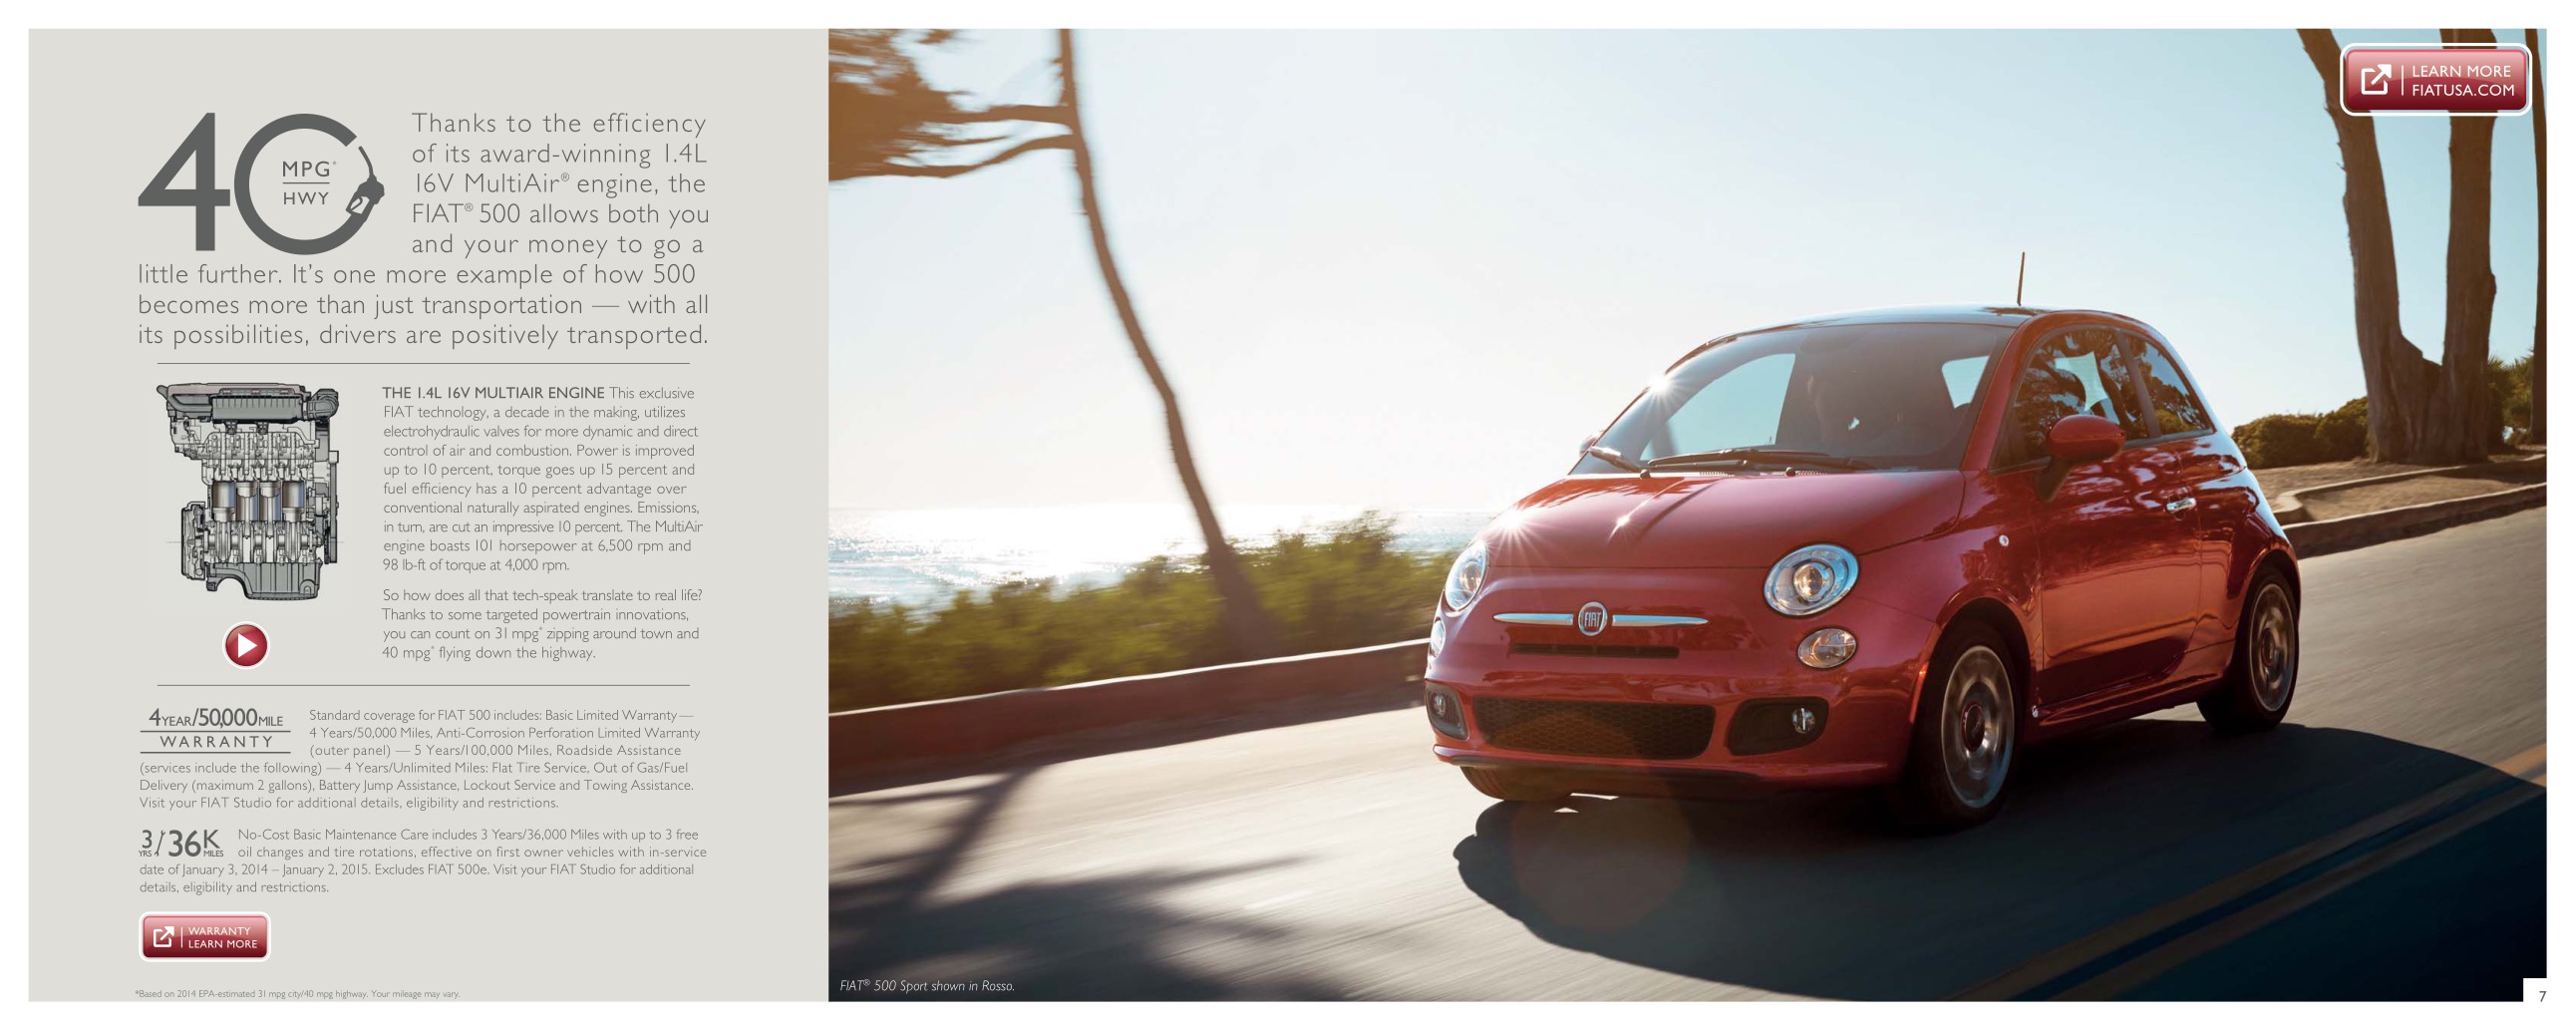 2015 Fiat Full-Line Brochure Page 2